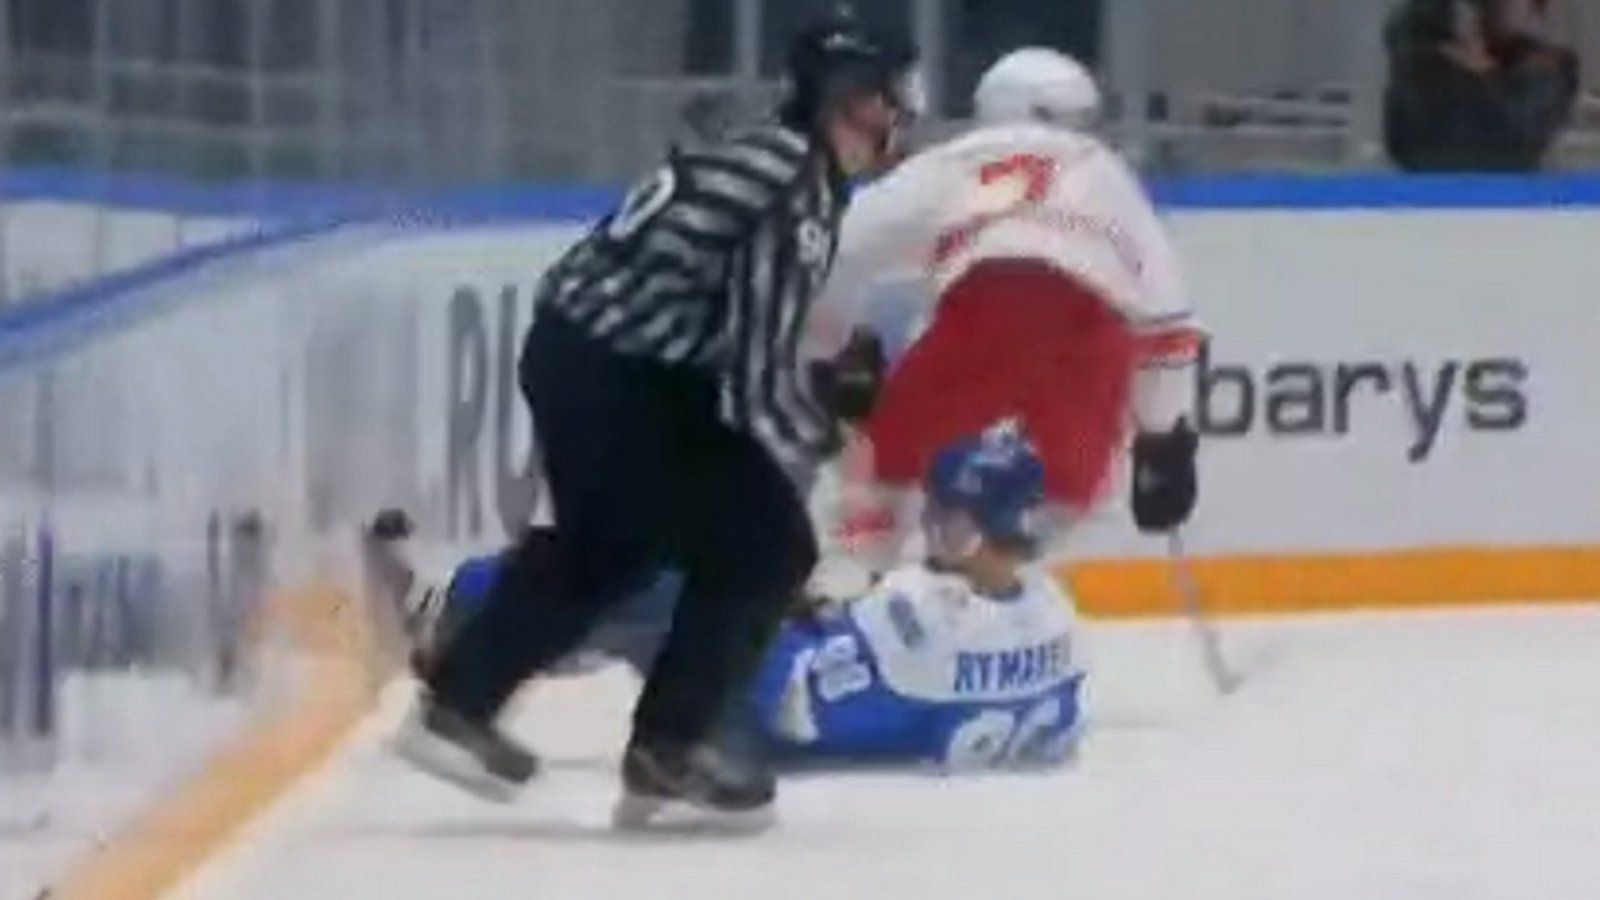 What the hell? KHL linesman delivers a nasty hit to unsuspecting player.